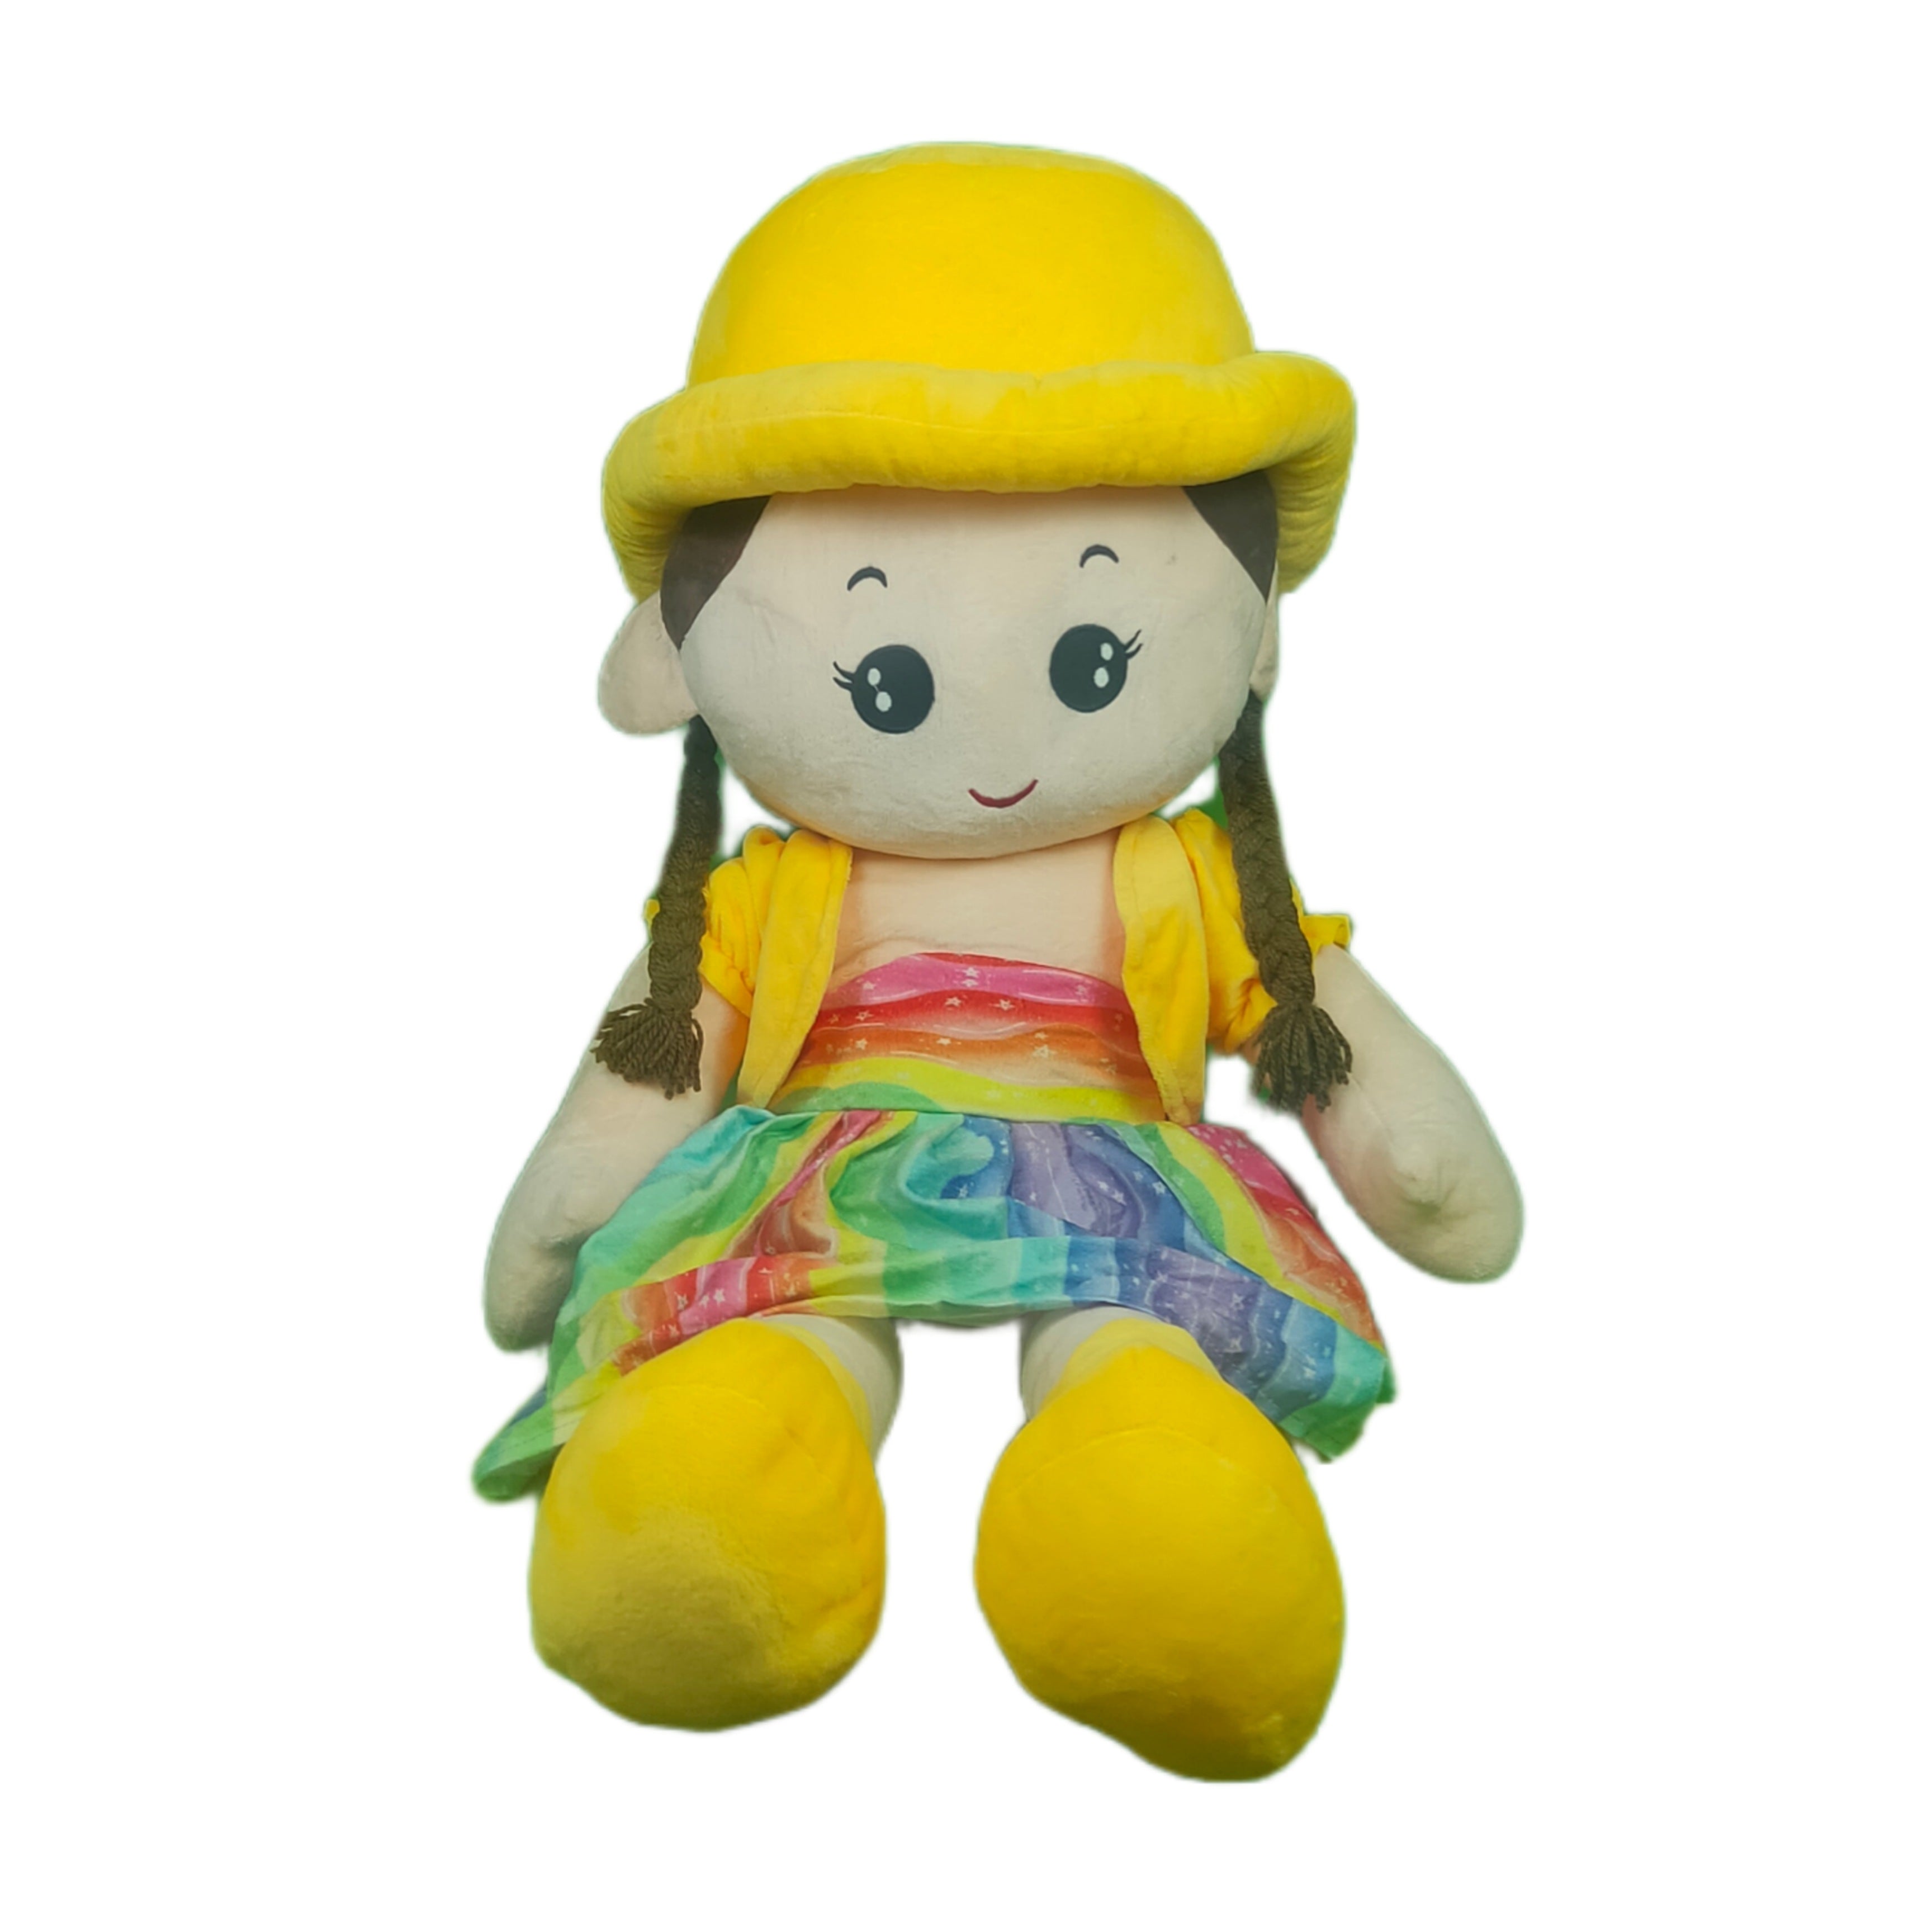 Play Hour Rag Doll Plush Soft Toy Wearing Yellow Cap for Ages 3 Years and Up, 90cm